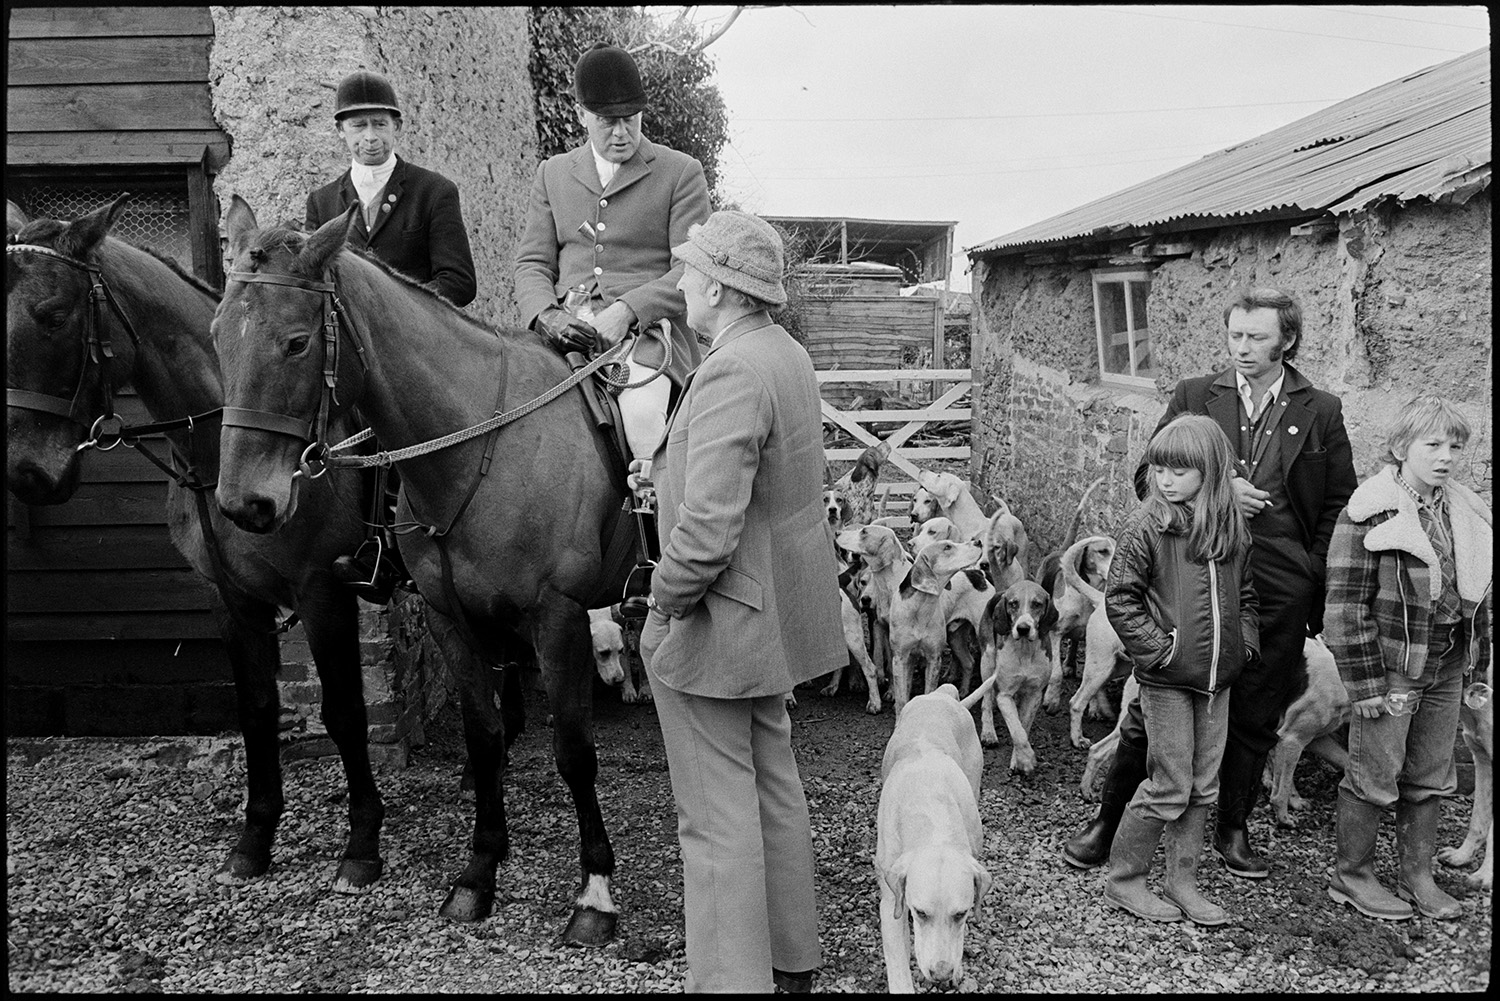 Hunt meet at house, followers and riders waiting, master, hounds setting off through village.
[Hunt Master mounted on a horse and another mounted rider in the farmyard of Hackwells, Dolton talking to a man. A pack of hounds and  a man and two children are with them by a barn.]